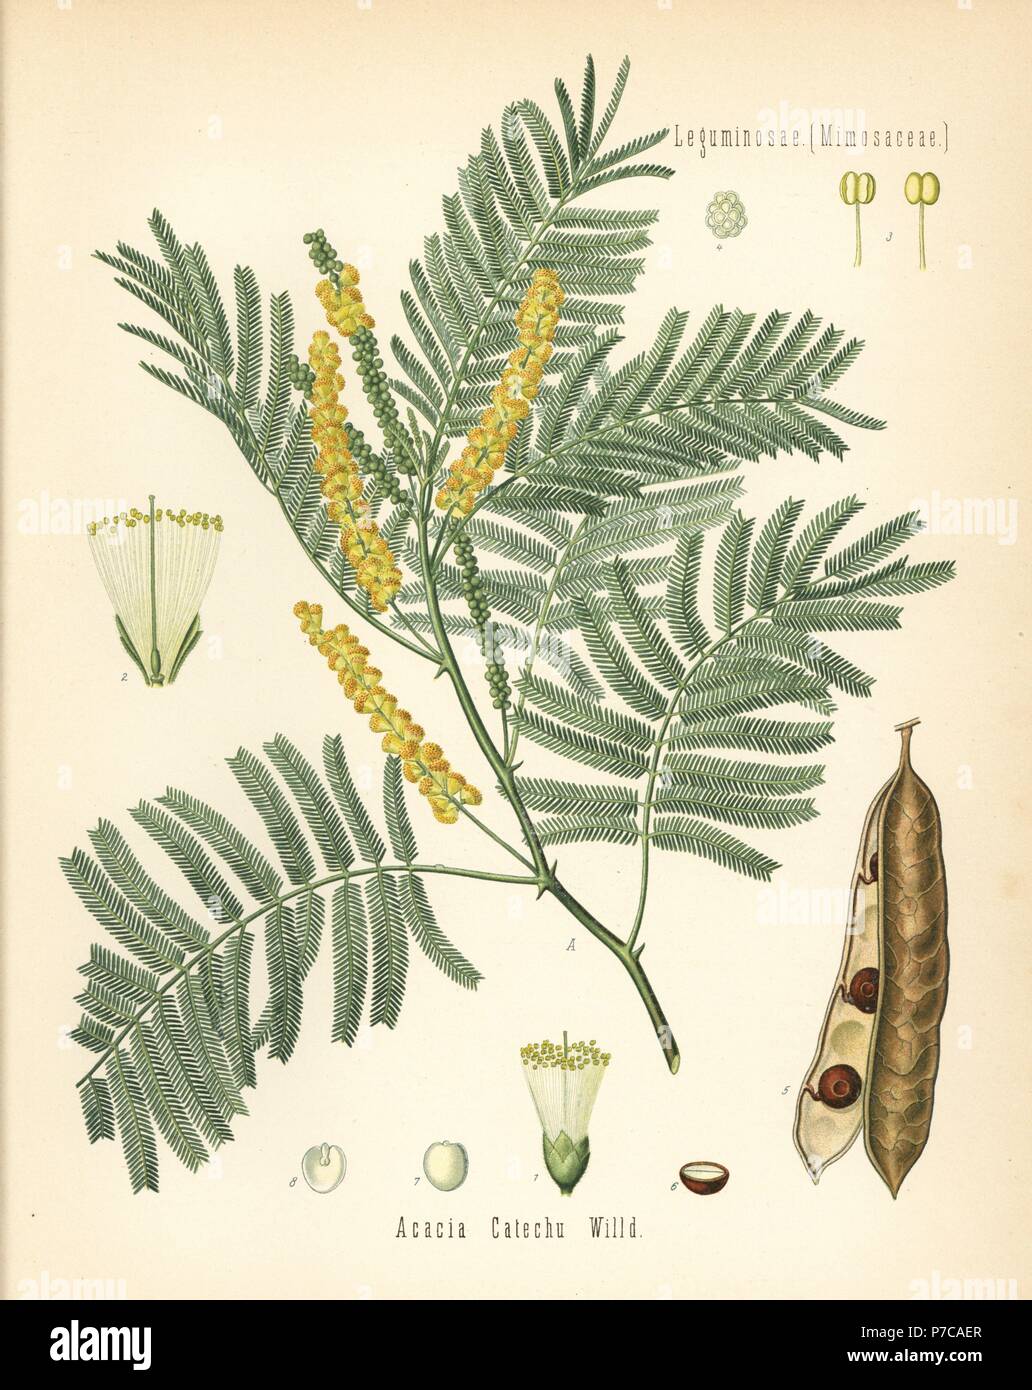 Catechu or black cutch, Acacia catechu. Chromolithograph after a botanical illustration from Hermann Adolph Koehler's Medicinal Plants, edited by Gustav Pabst, Koehler, Germany, 1887. Stock Photo